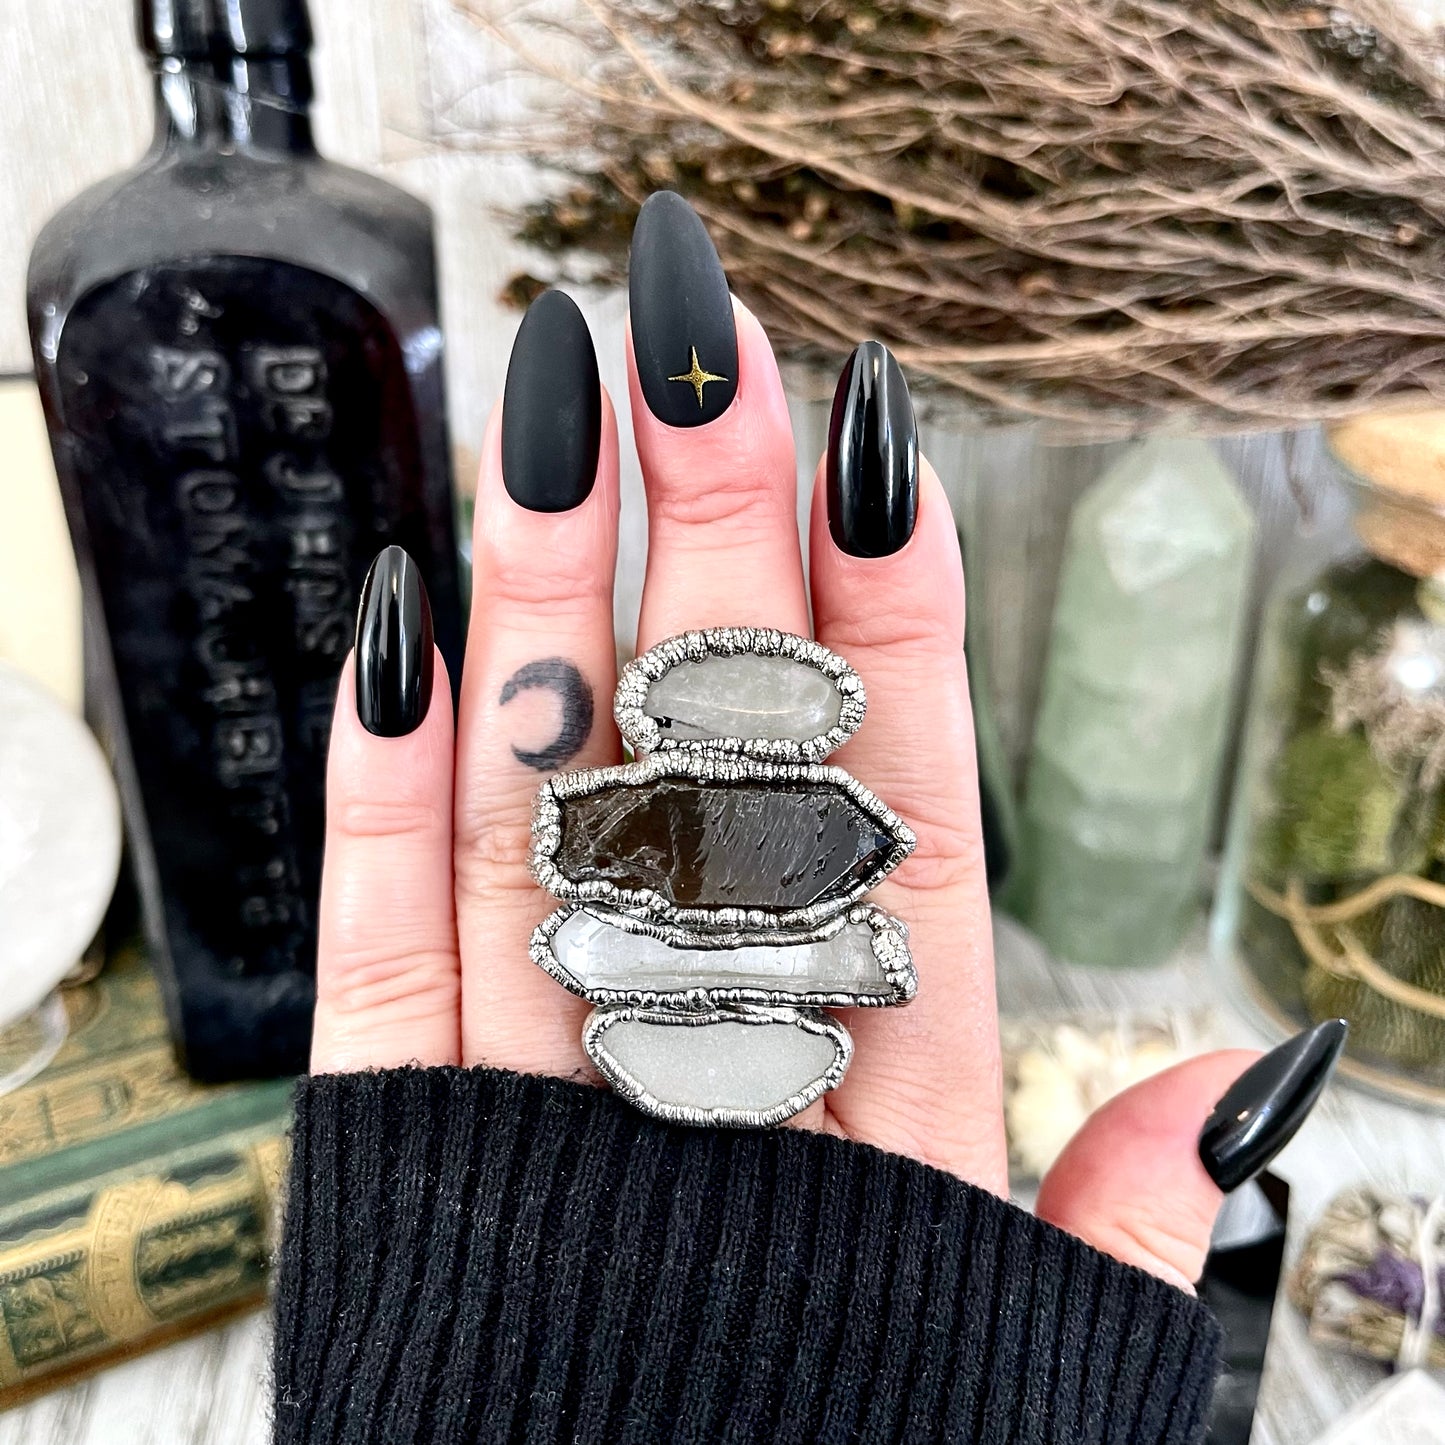 Size 7.5 Crystal Ring - Four Stone Sea Glass Tourmaline Quartz Smokey and Clear Quartz Ring In Silver  / Foxlark - One of a Kind